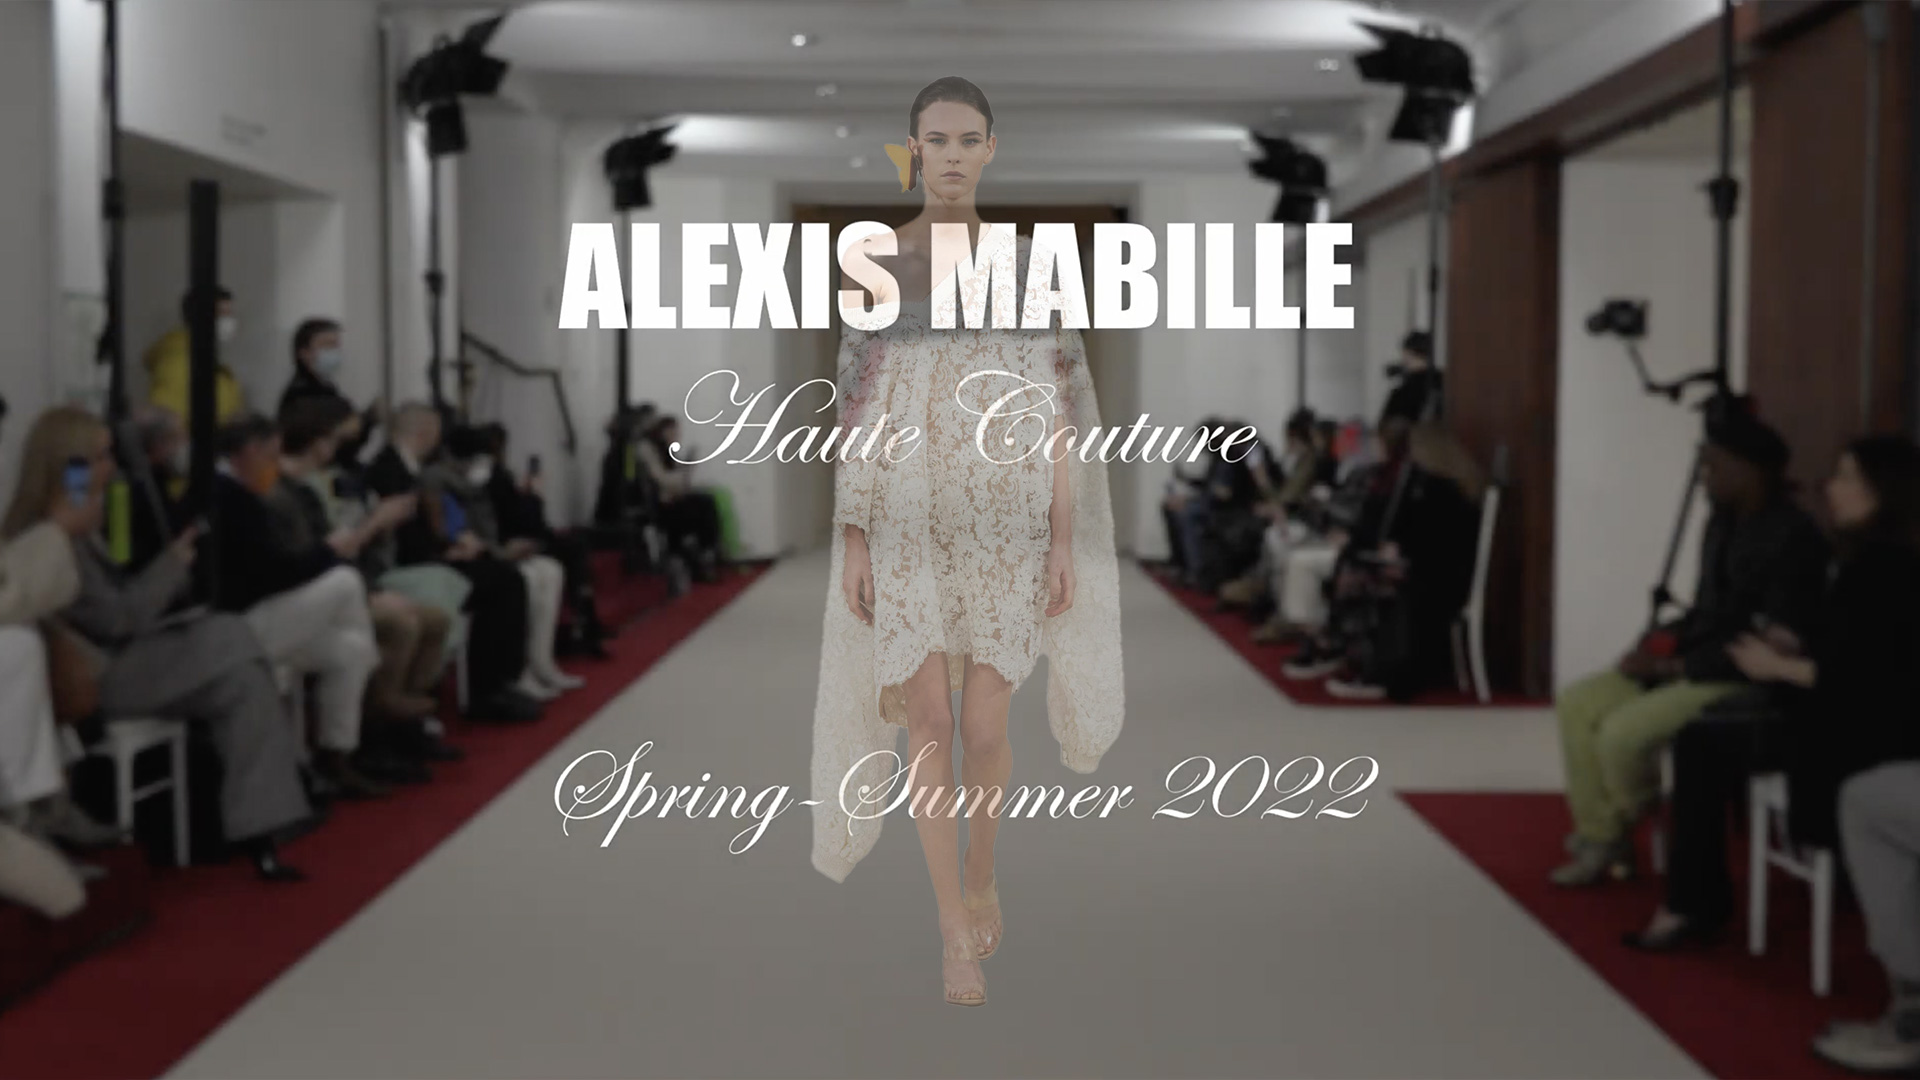 SPRING-SUMMER 2022 ALEXIS MABILLE HAUTE COUTURE COLLECTION